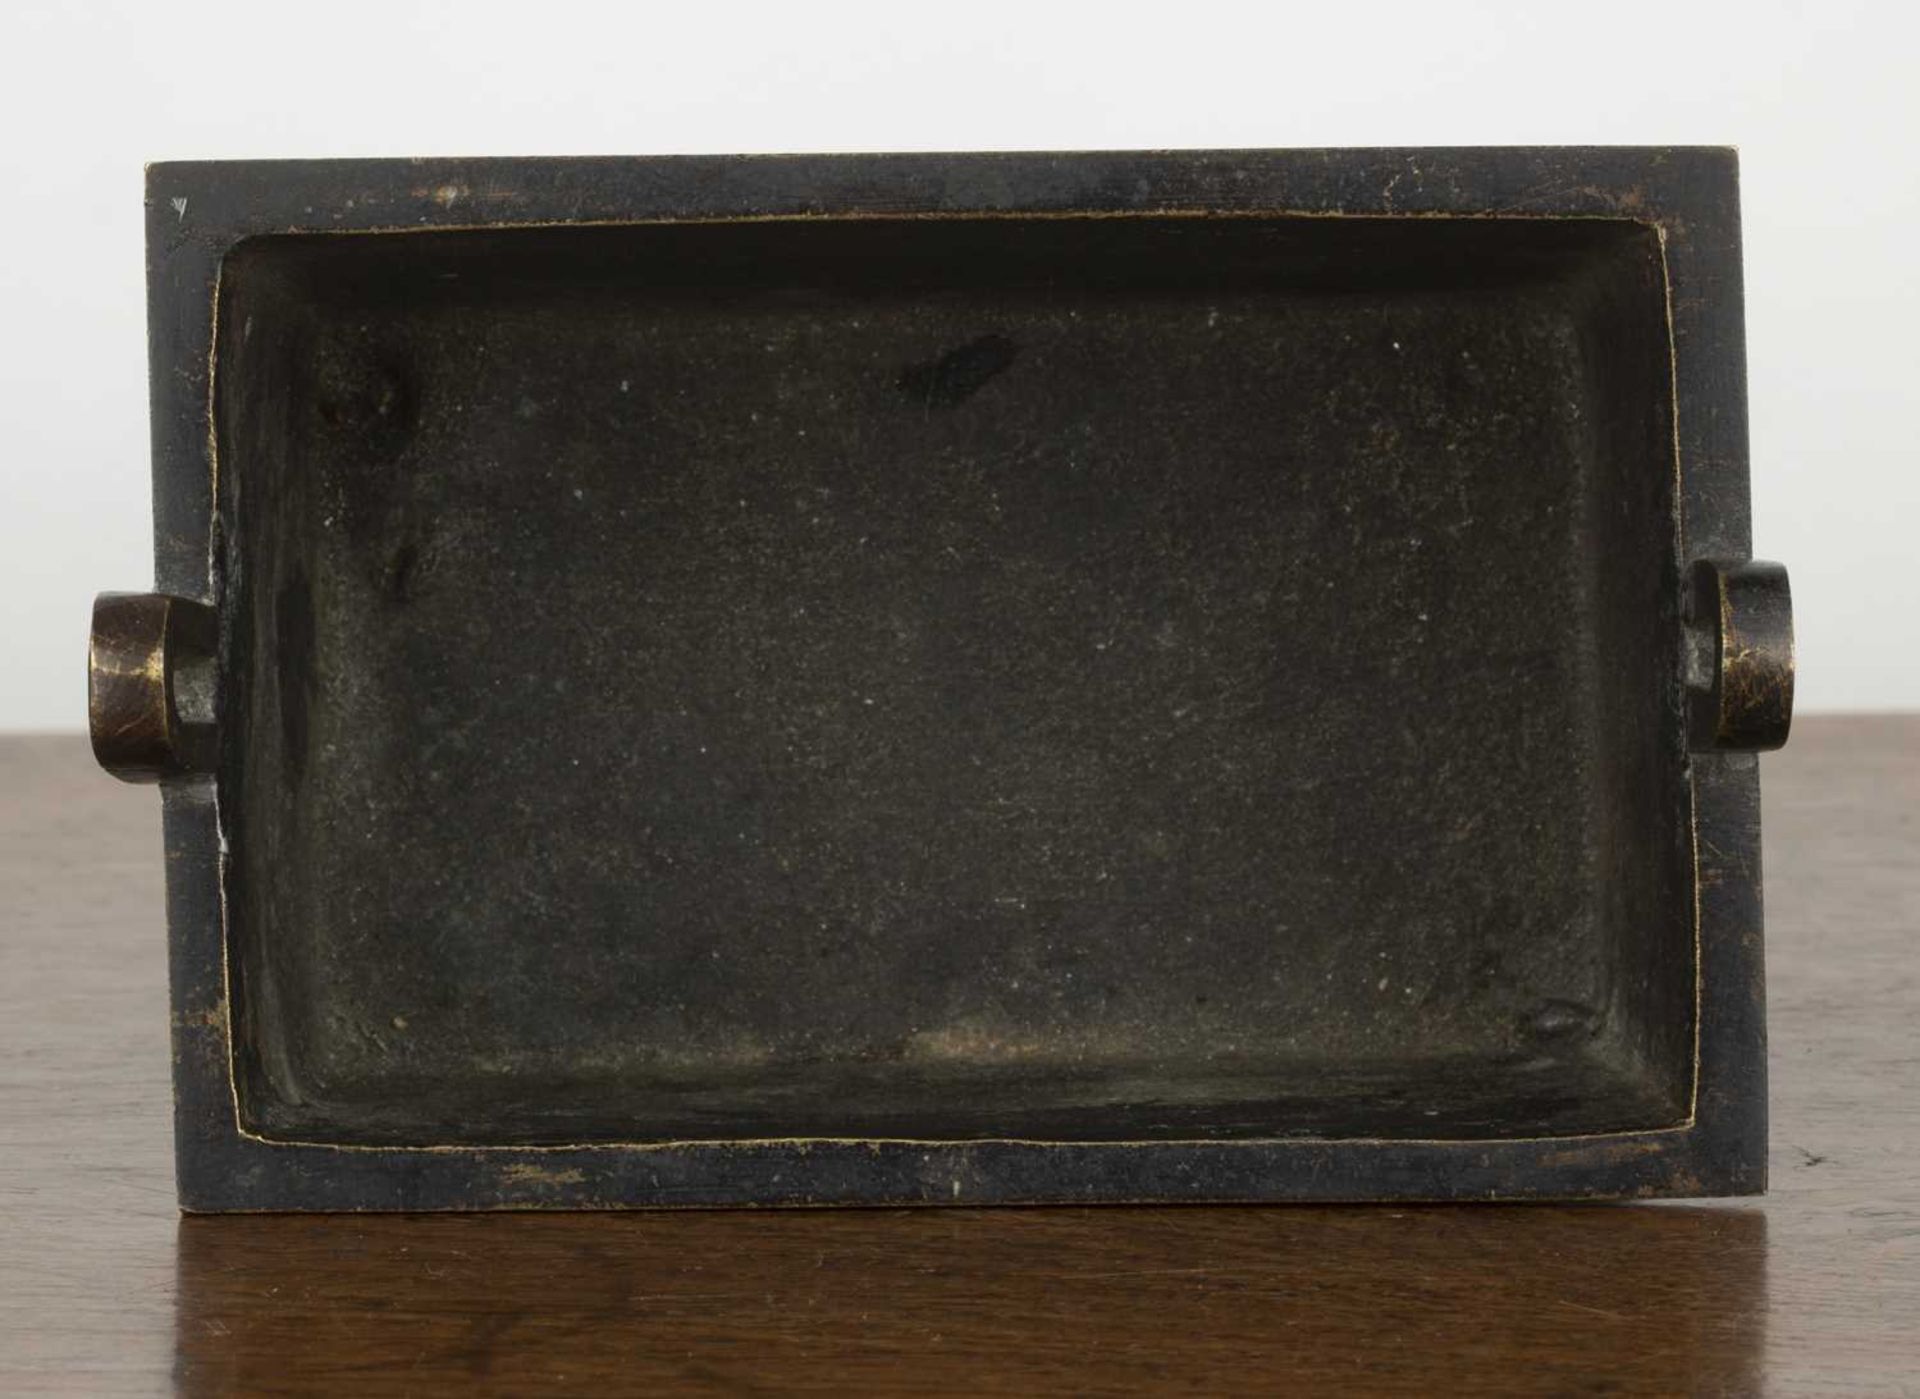 Small bronze censer Chinese of rectangular form with cloisonne panels, 13cm x 8.6cm x 11cm - Image 5 of 6